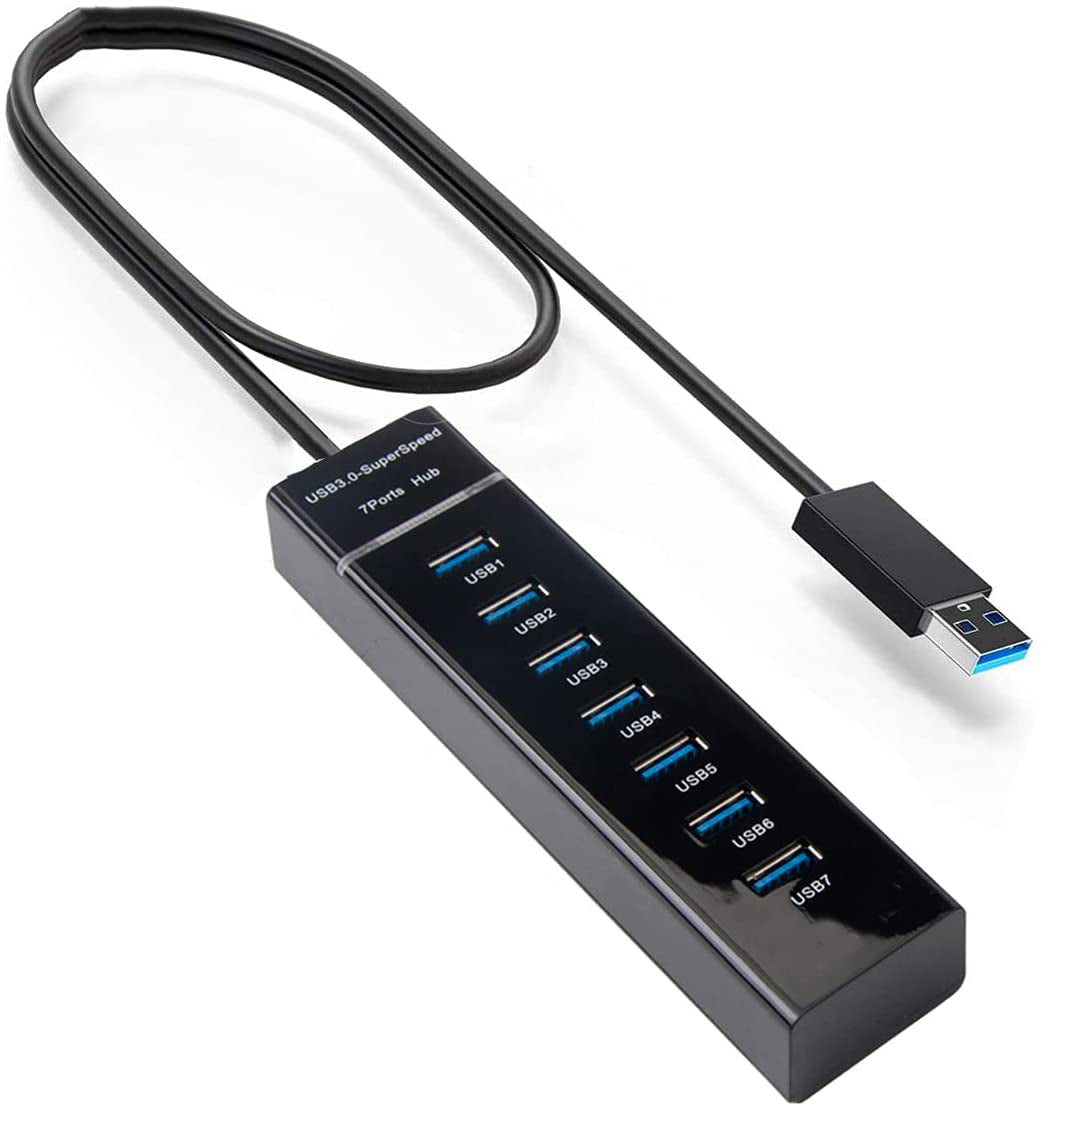 USB 3.0 Super Speed 7 Port Hub for All Computers & Consoles - Black